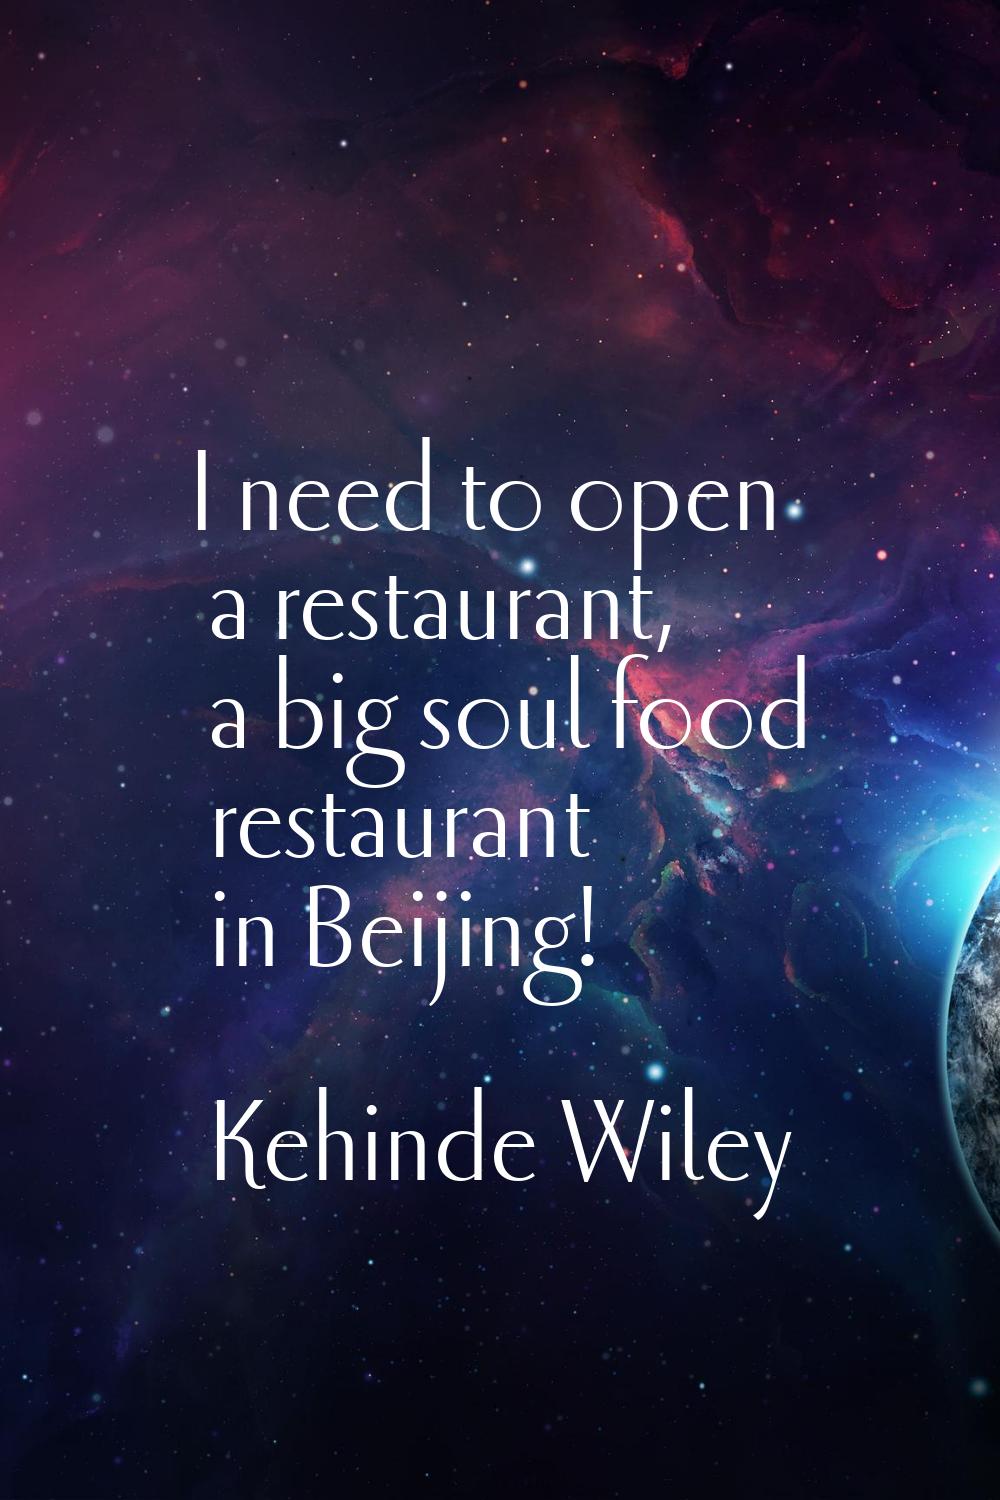 I need to open a restaurant, a big soul food restaurant in Beijing!